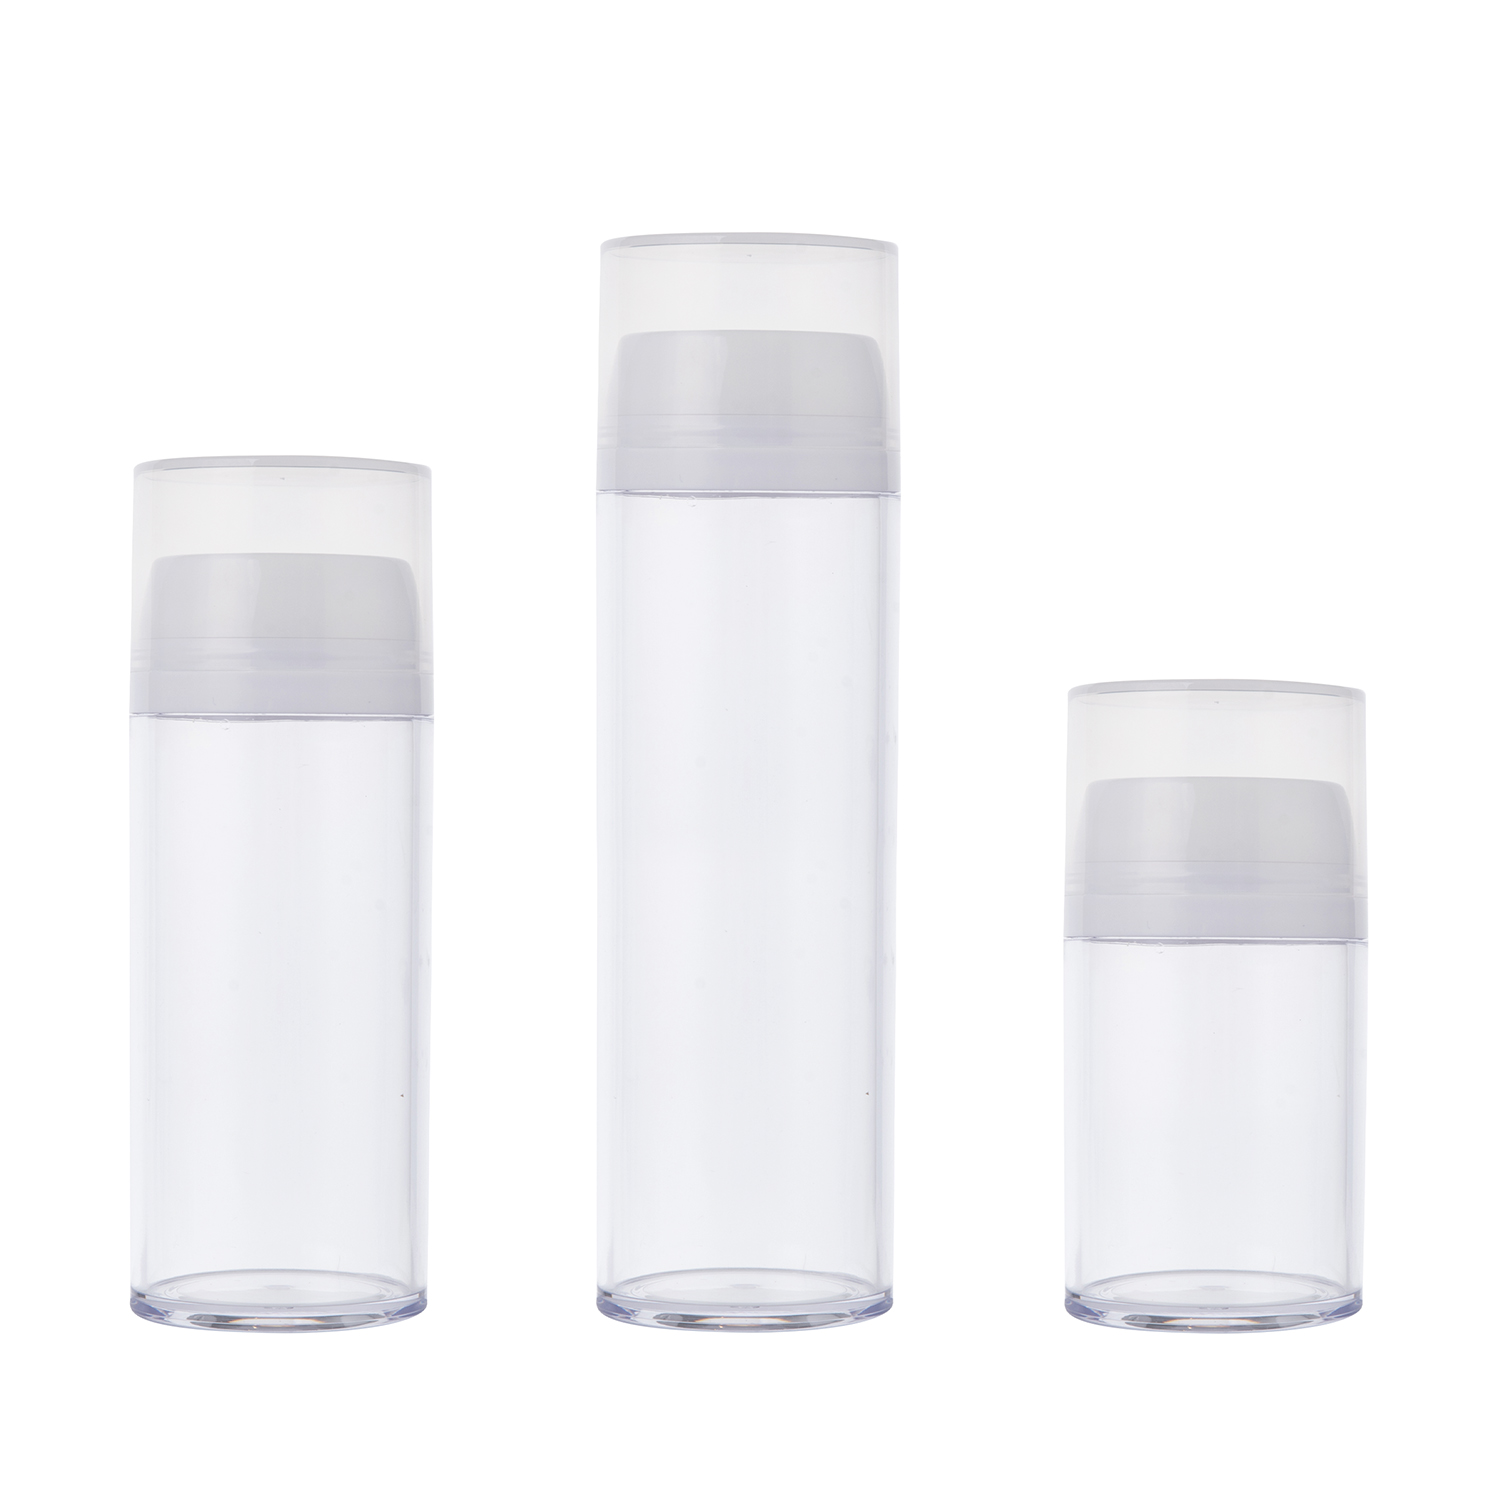  50ml 100ml 150ml AS Material Airless Bottles High Quality Cosmetic Airless Bottle